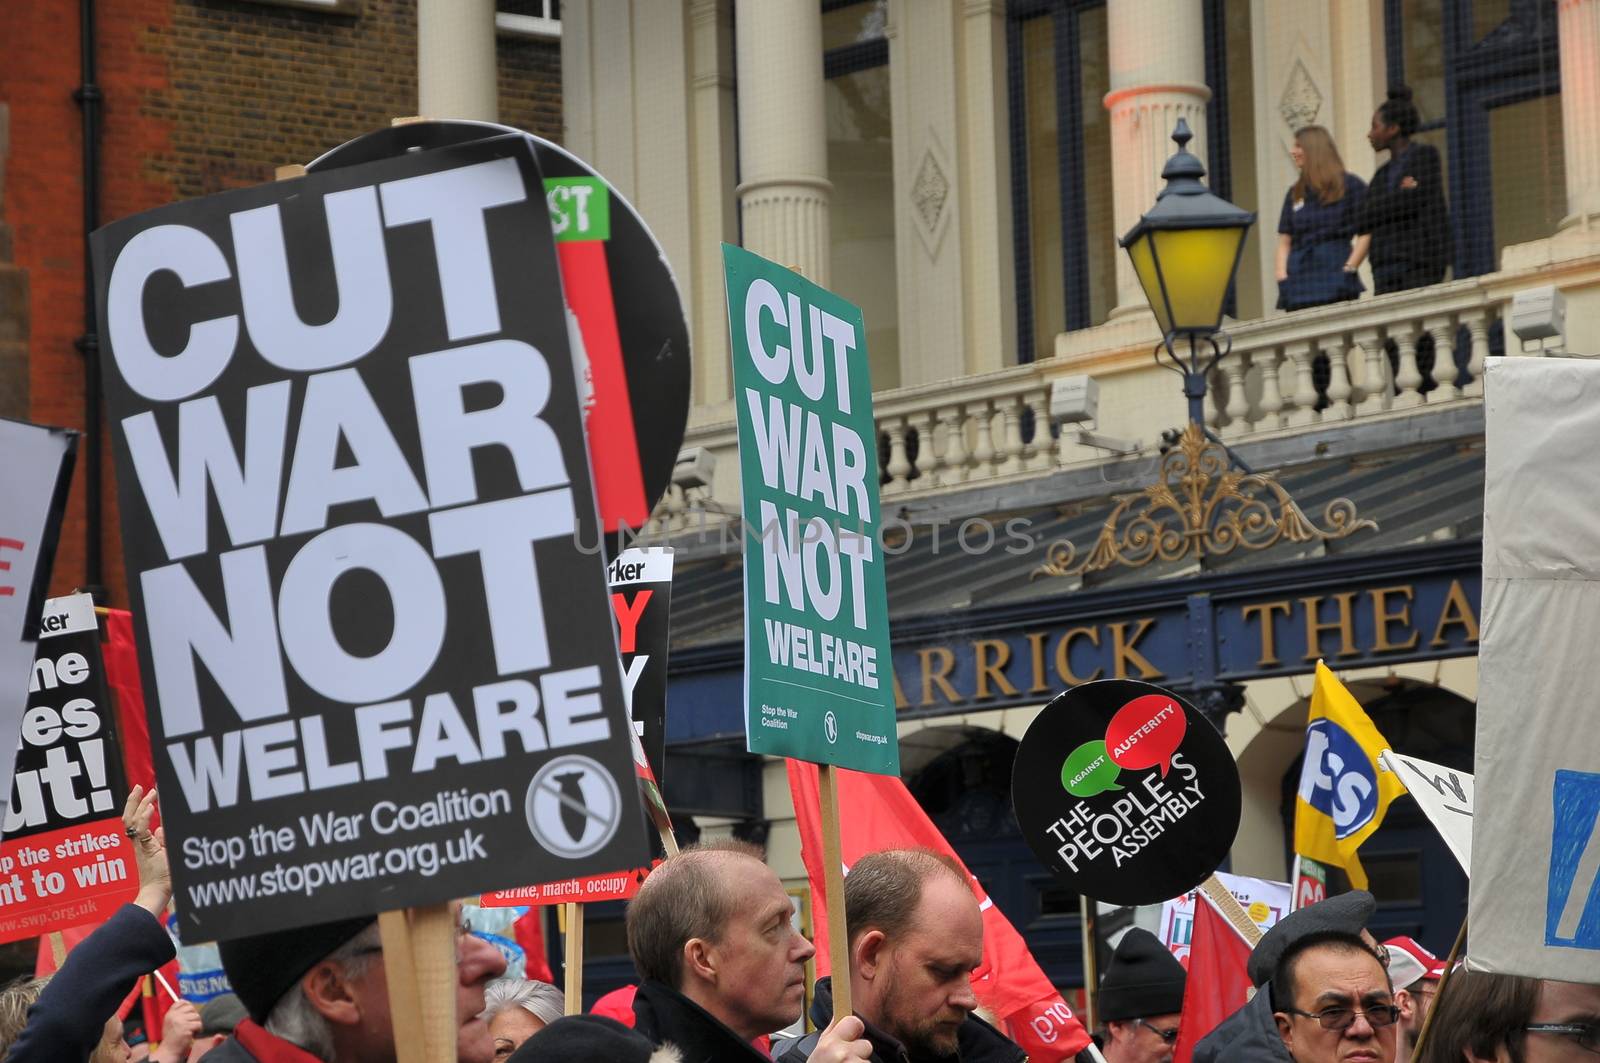 UNITED KINGDOM, London: A protester holds a sign reading 'Cut war not welfare' as ten of thousands march and protest against the Tories government and demanded David Cameron's resignation in Trafalgar square in London on April 16, 2016. Protesters descended to London in hundreds of coaches from all over the UK to take part in this anti-austerity protest.